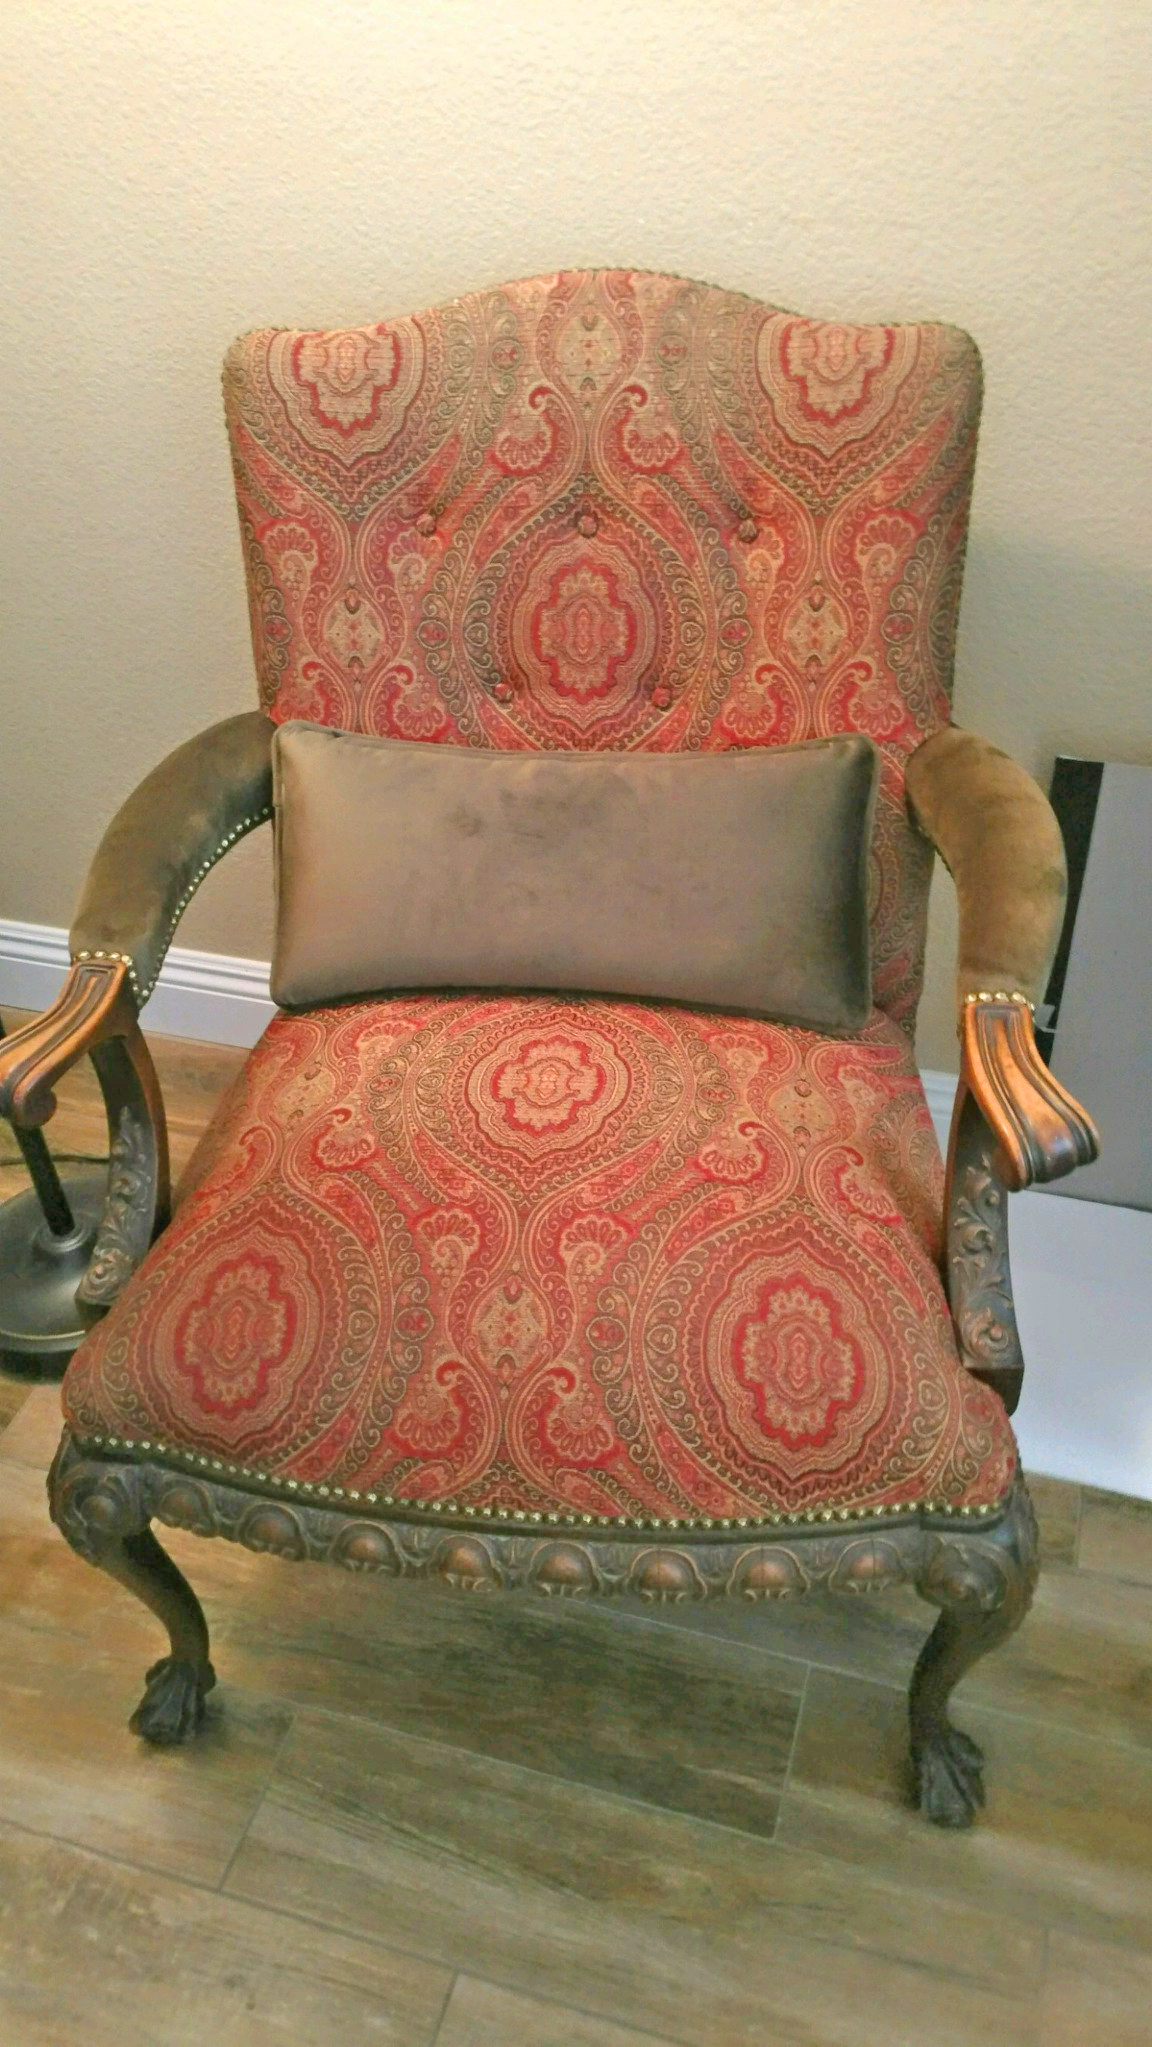 Mariam - Grandma's Antique Chair - Reupholstered ...